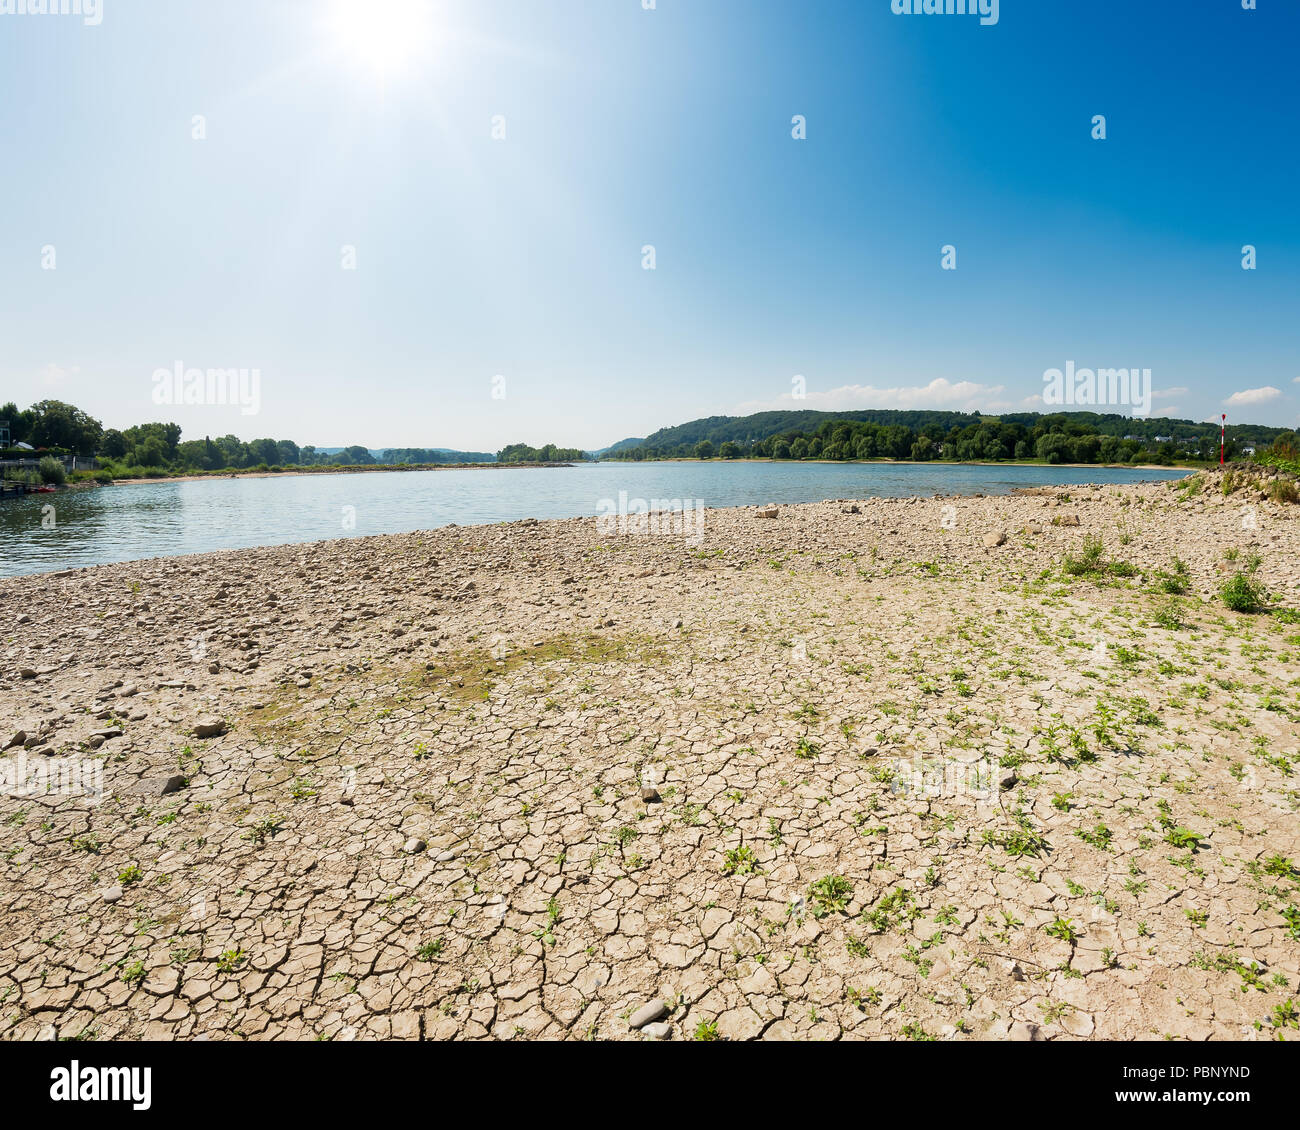 Dried-out riverbed with stones and sediments in the river Rhine, low water level between groins, caused by prolonged drought, NRW, Germany, Europe Stock Photo